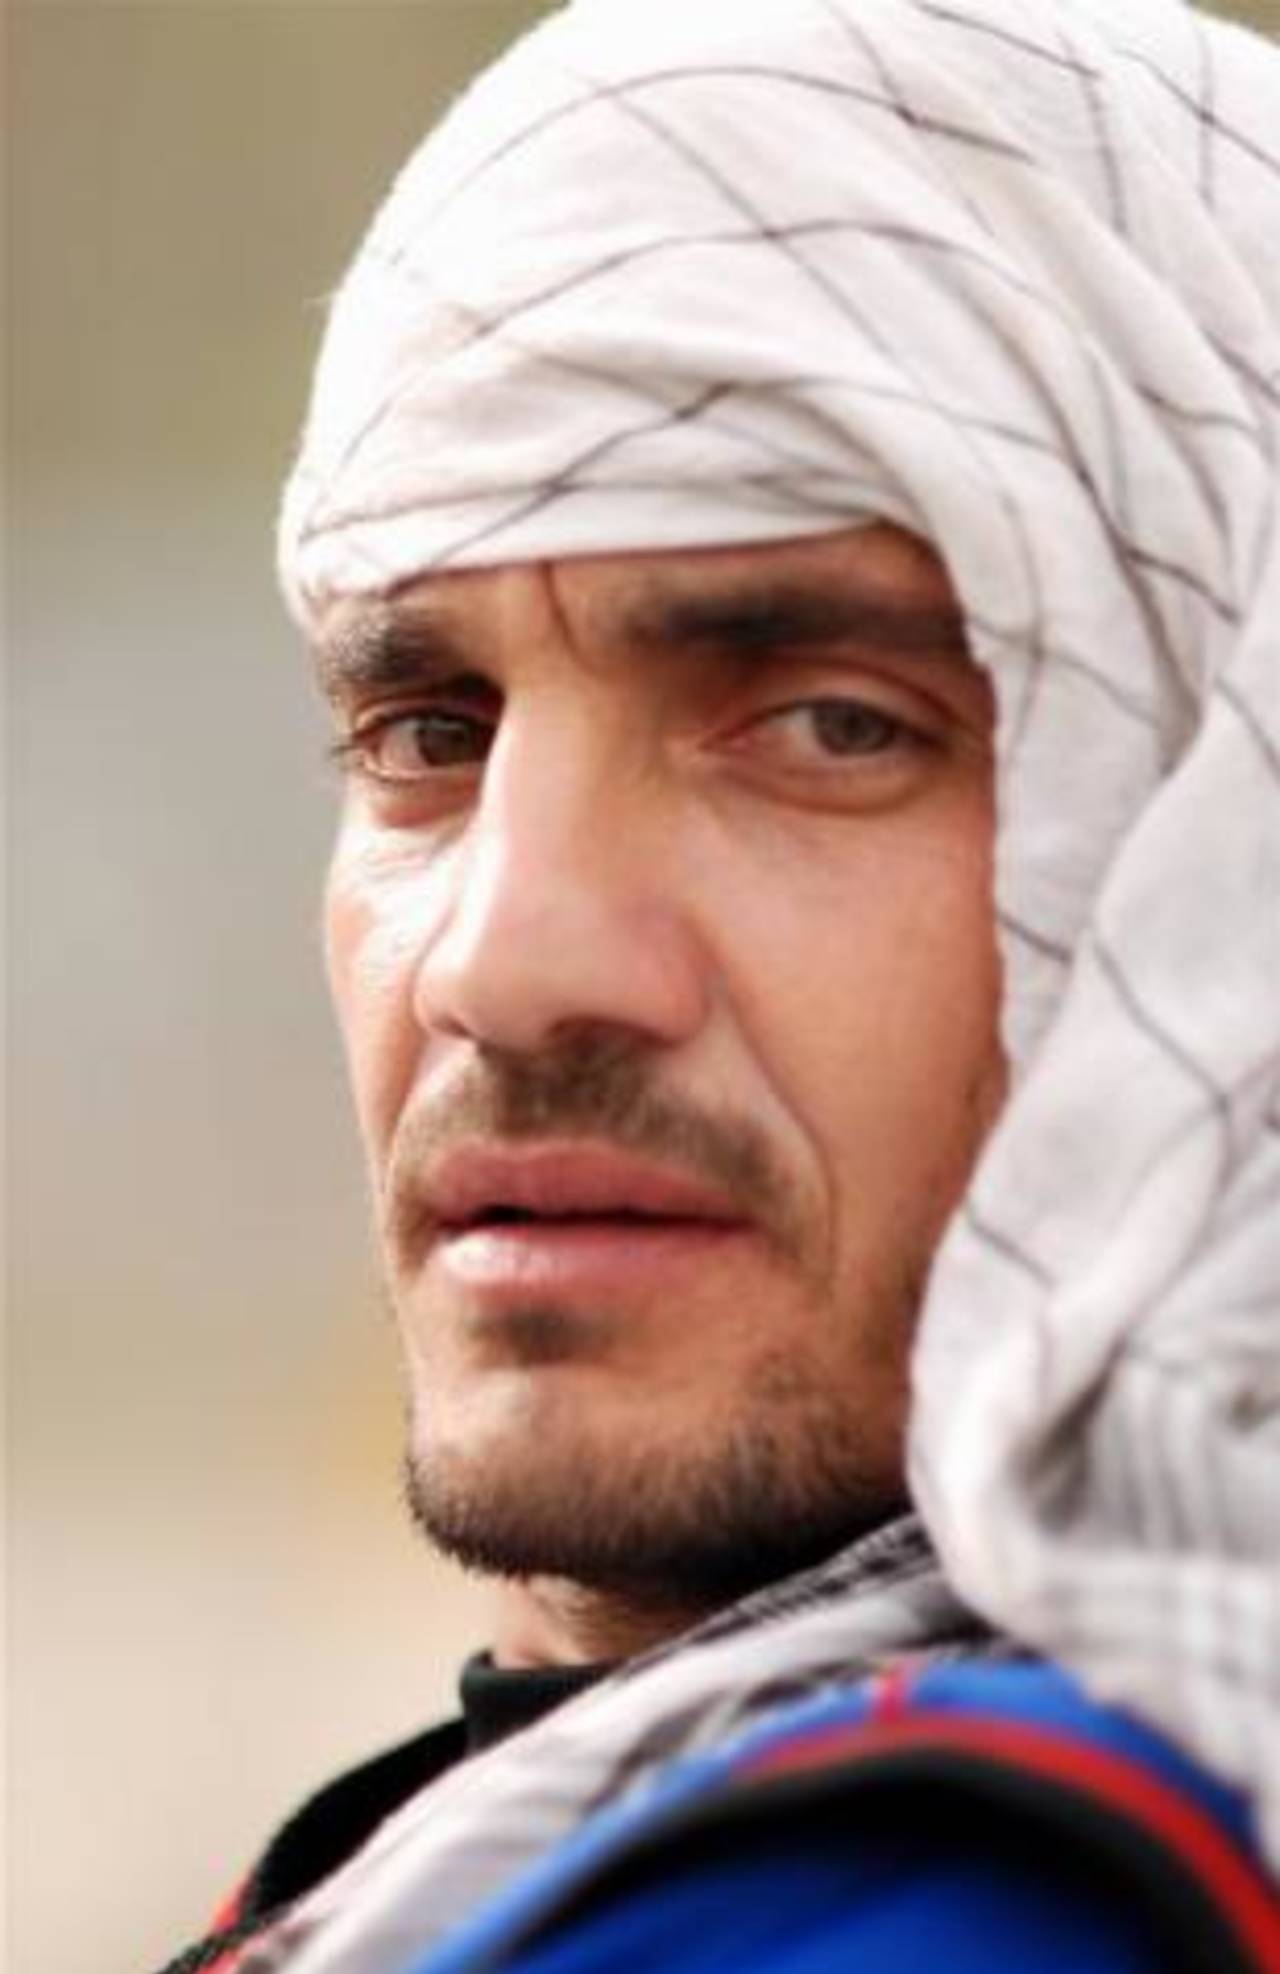 Close-up of Raees Ahmadzai of Afghanistan, April 2009